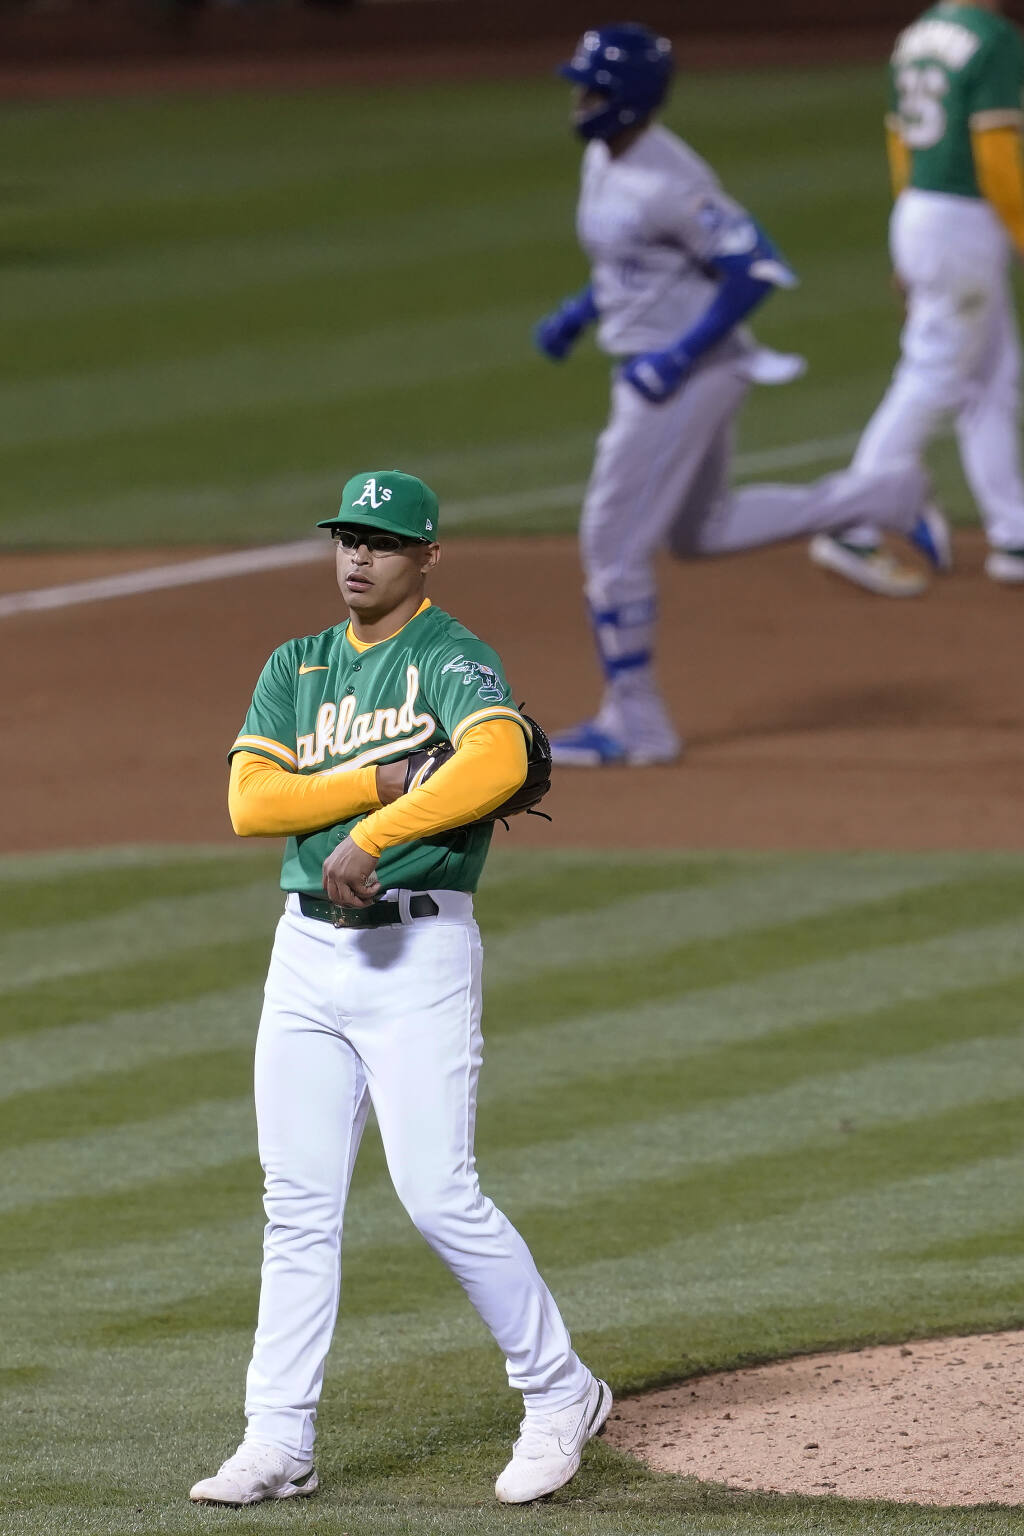 A's pitchers falter late in 6-1 loss to Royals